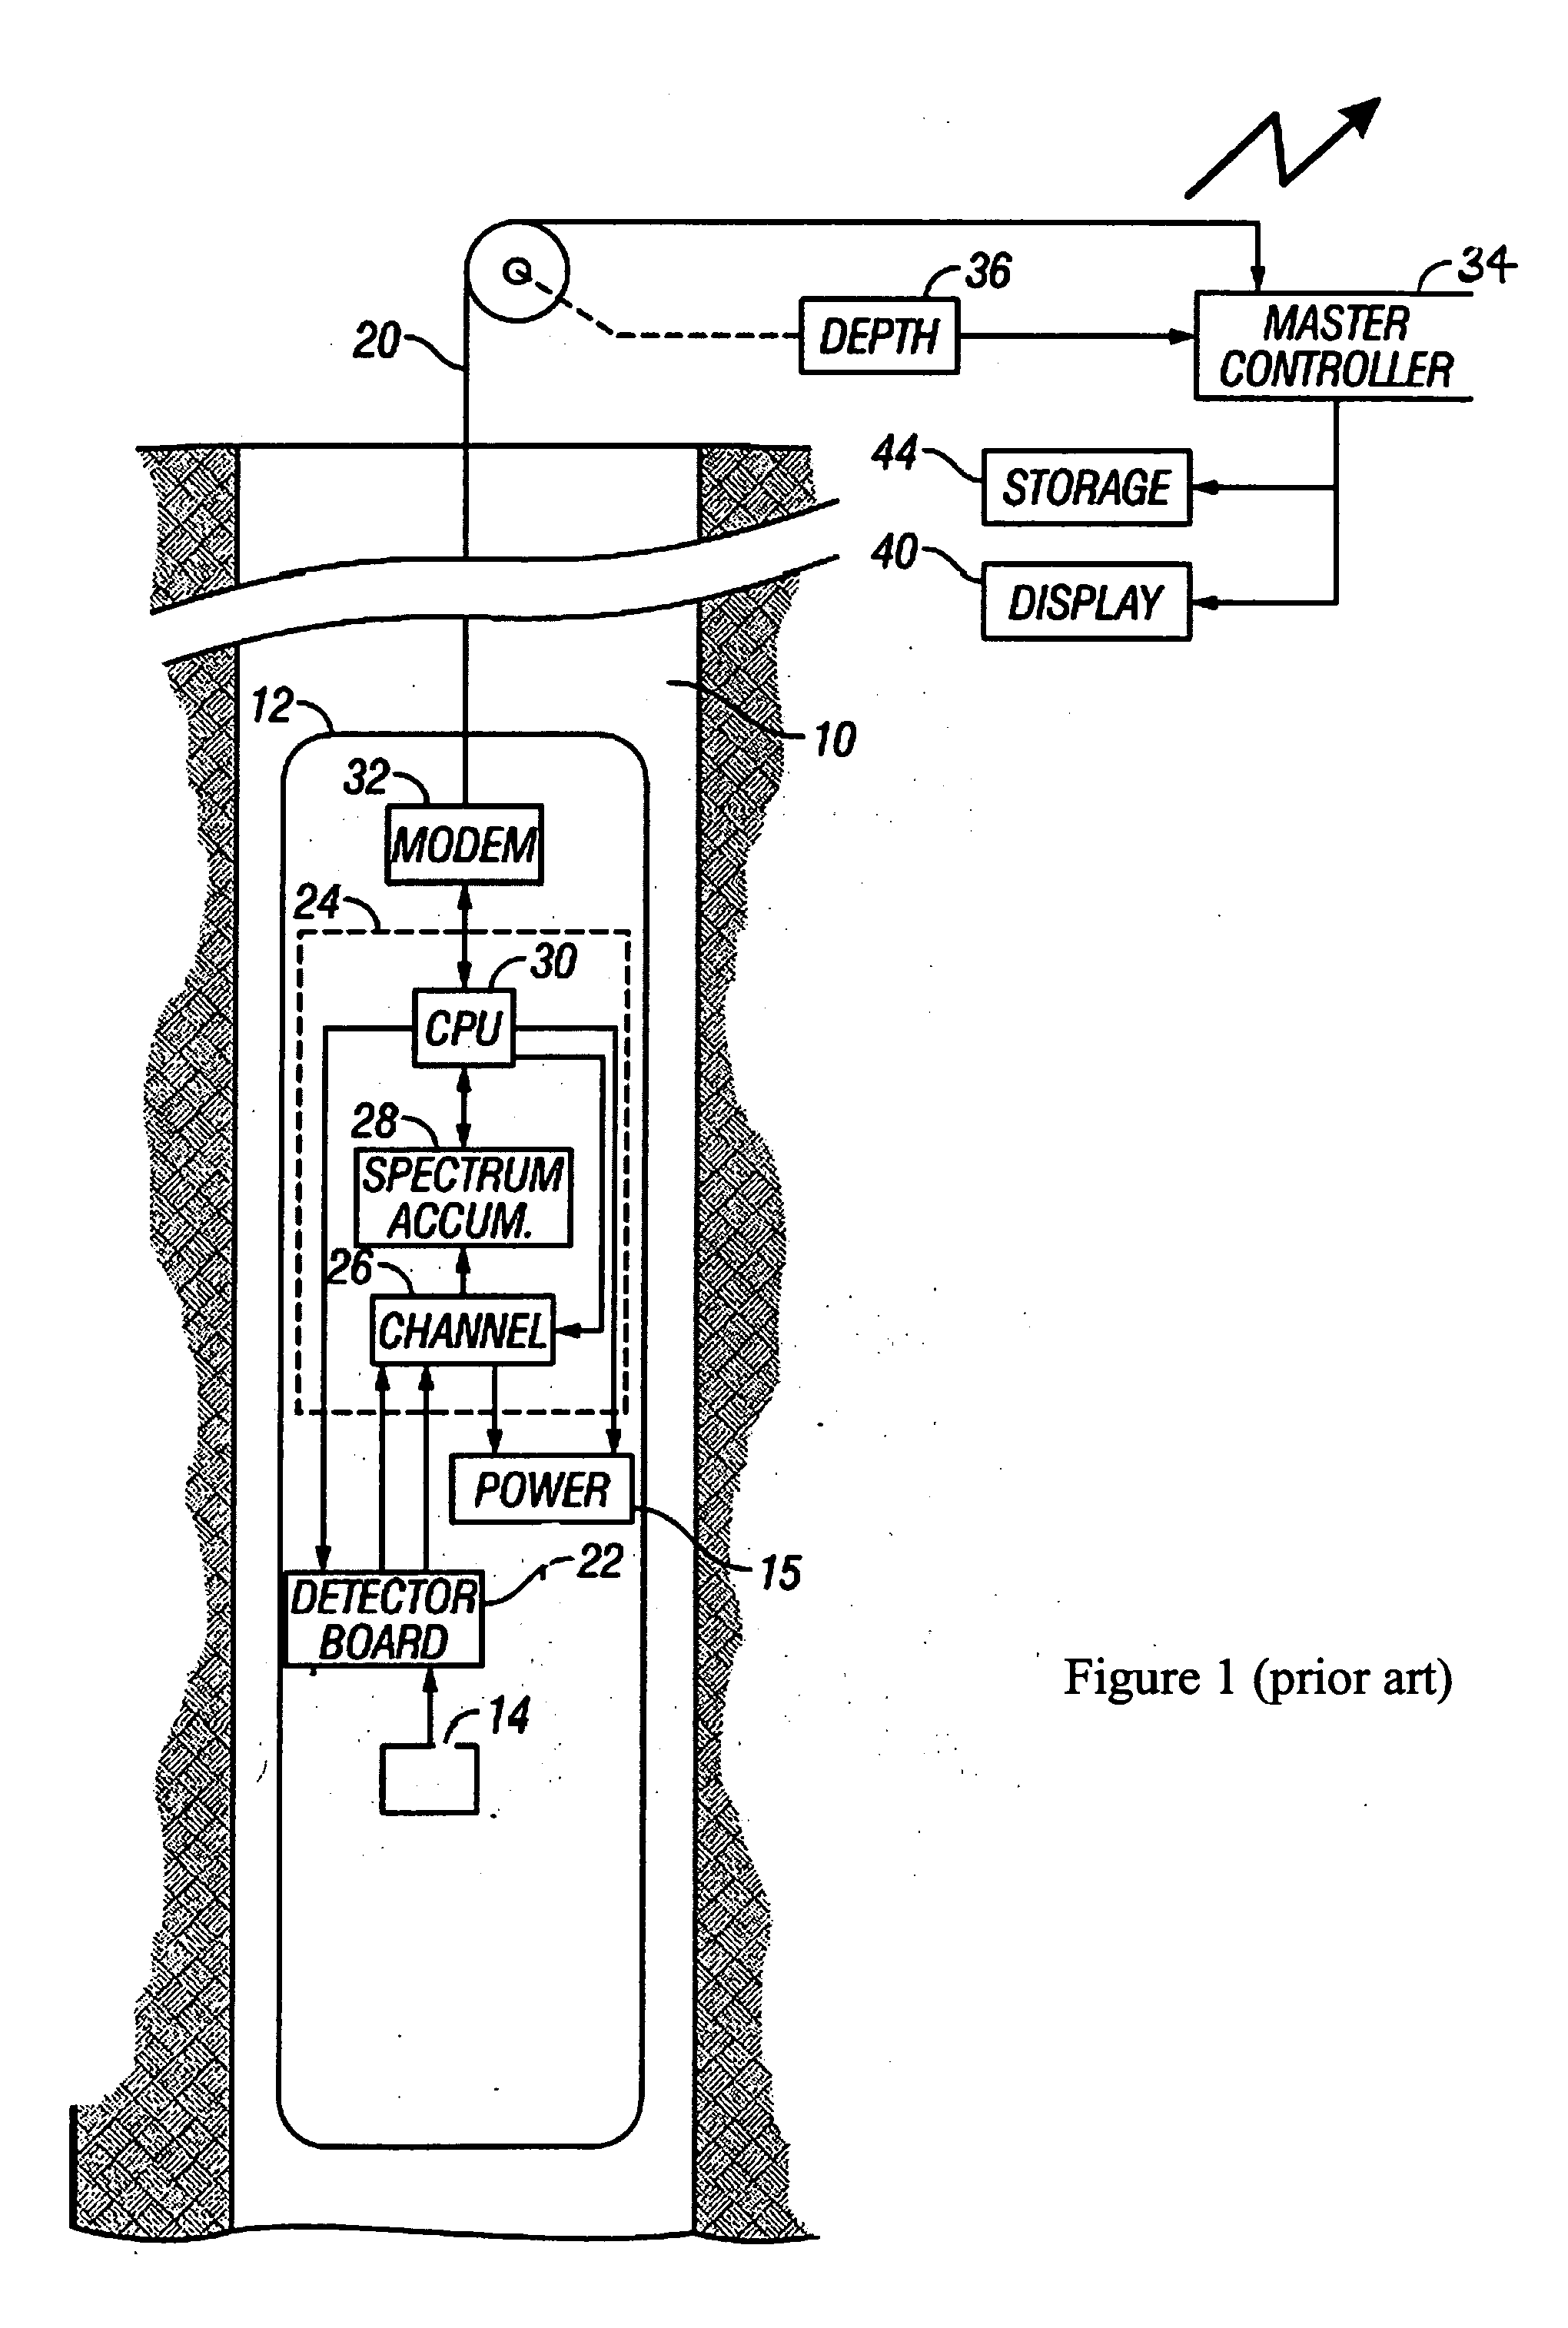 Method and apparatus for shale bed detection in deviated and horizontal wellbores